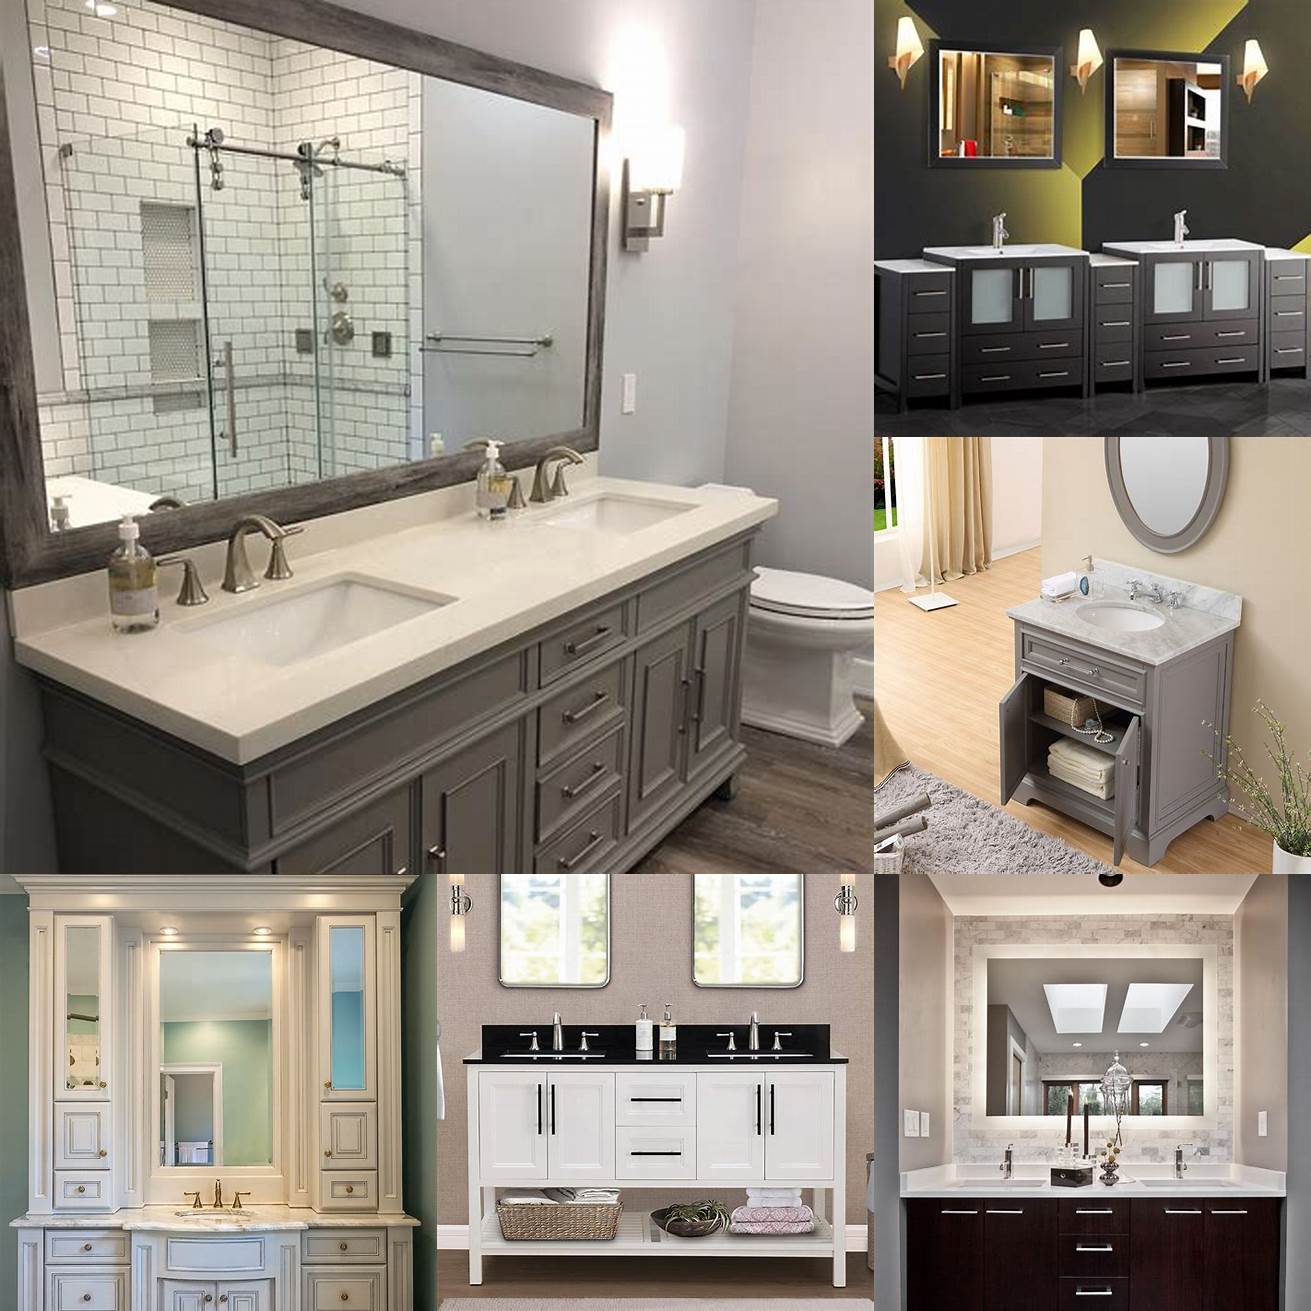 Style Choose a double vanity that matches your bathrooms style whether its modern traditional transitional or eclectic